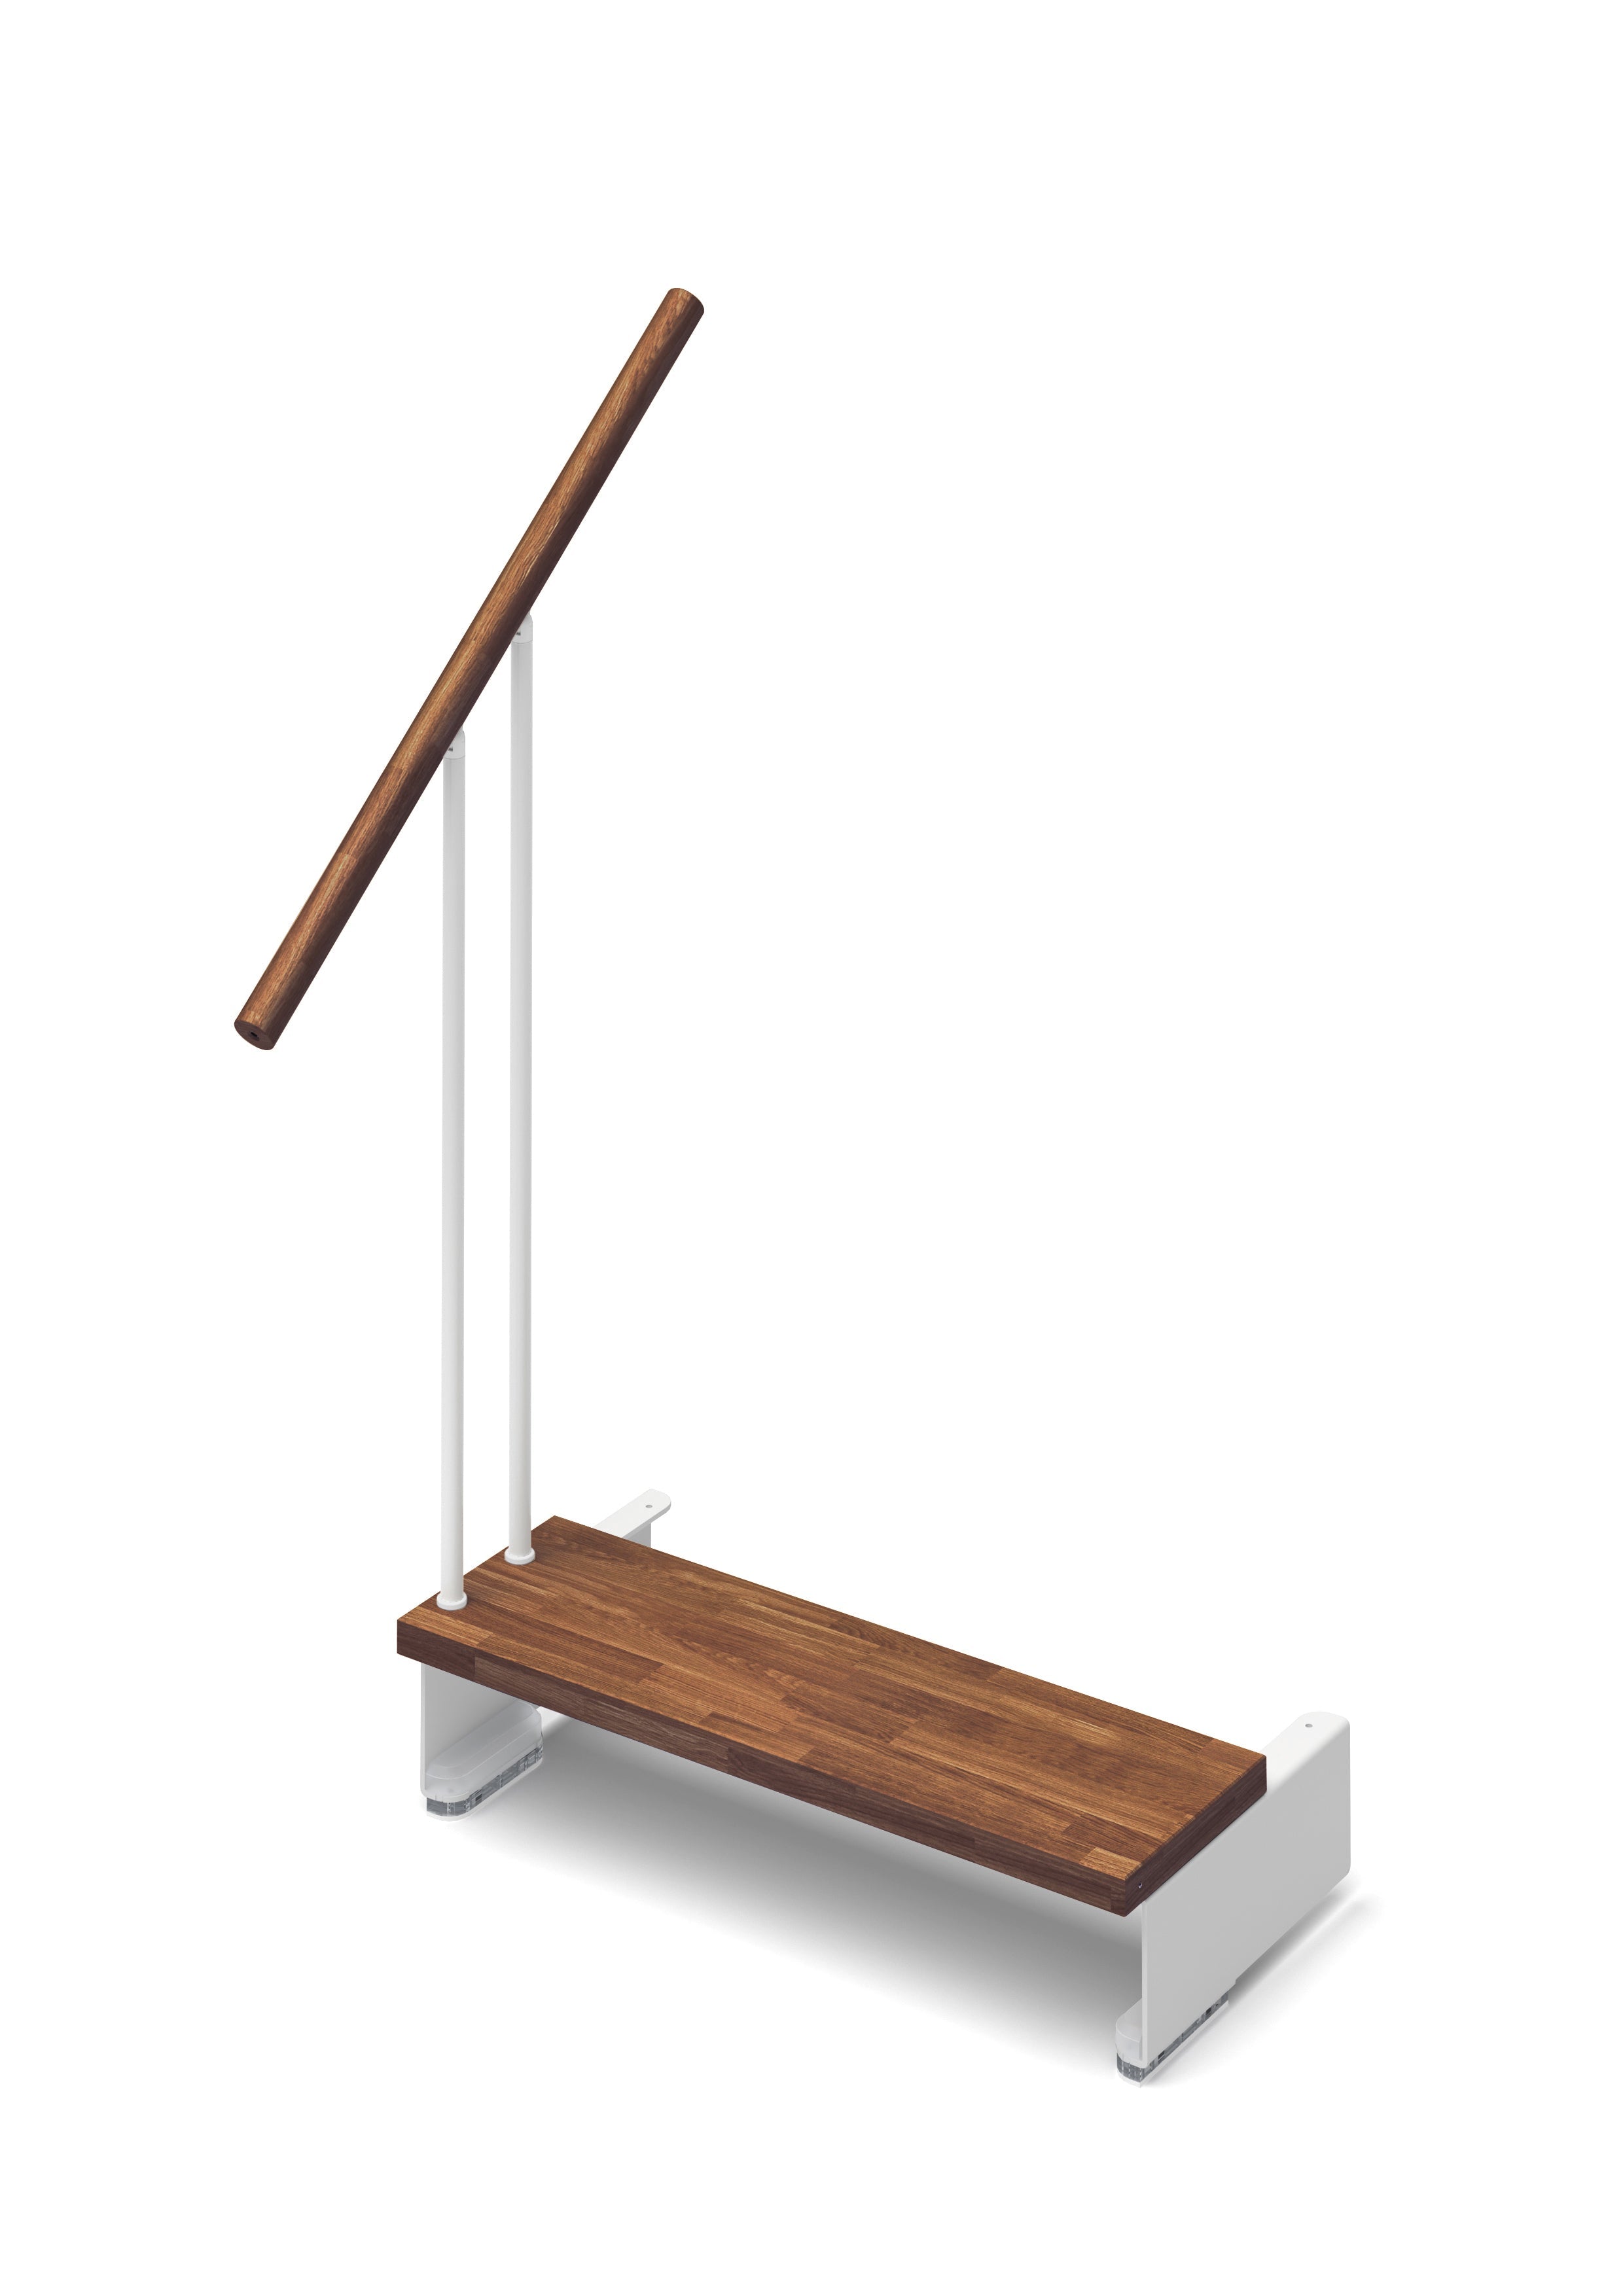 Additional step Adapta 84cm (with structure and railing) - Walnut 25